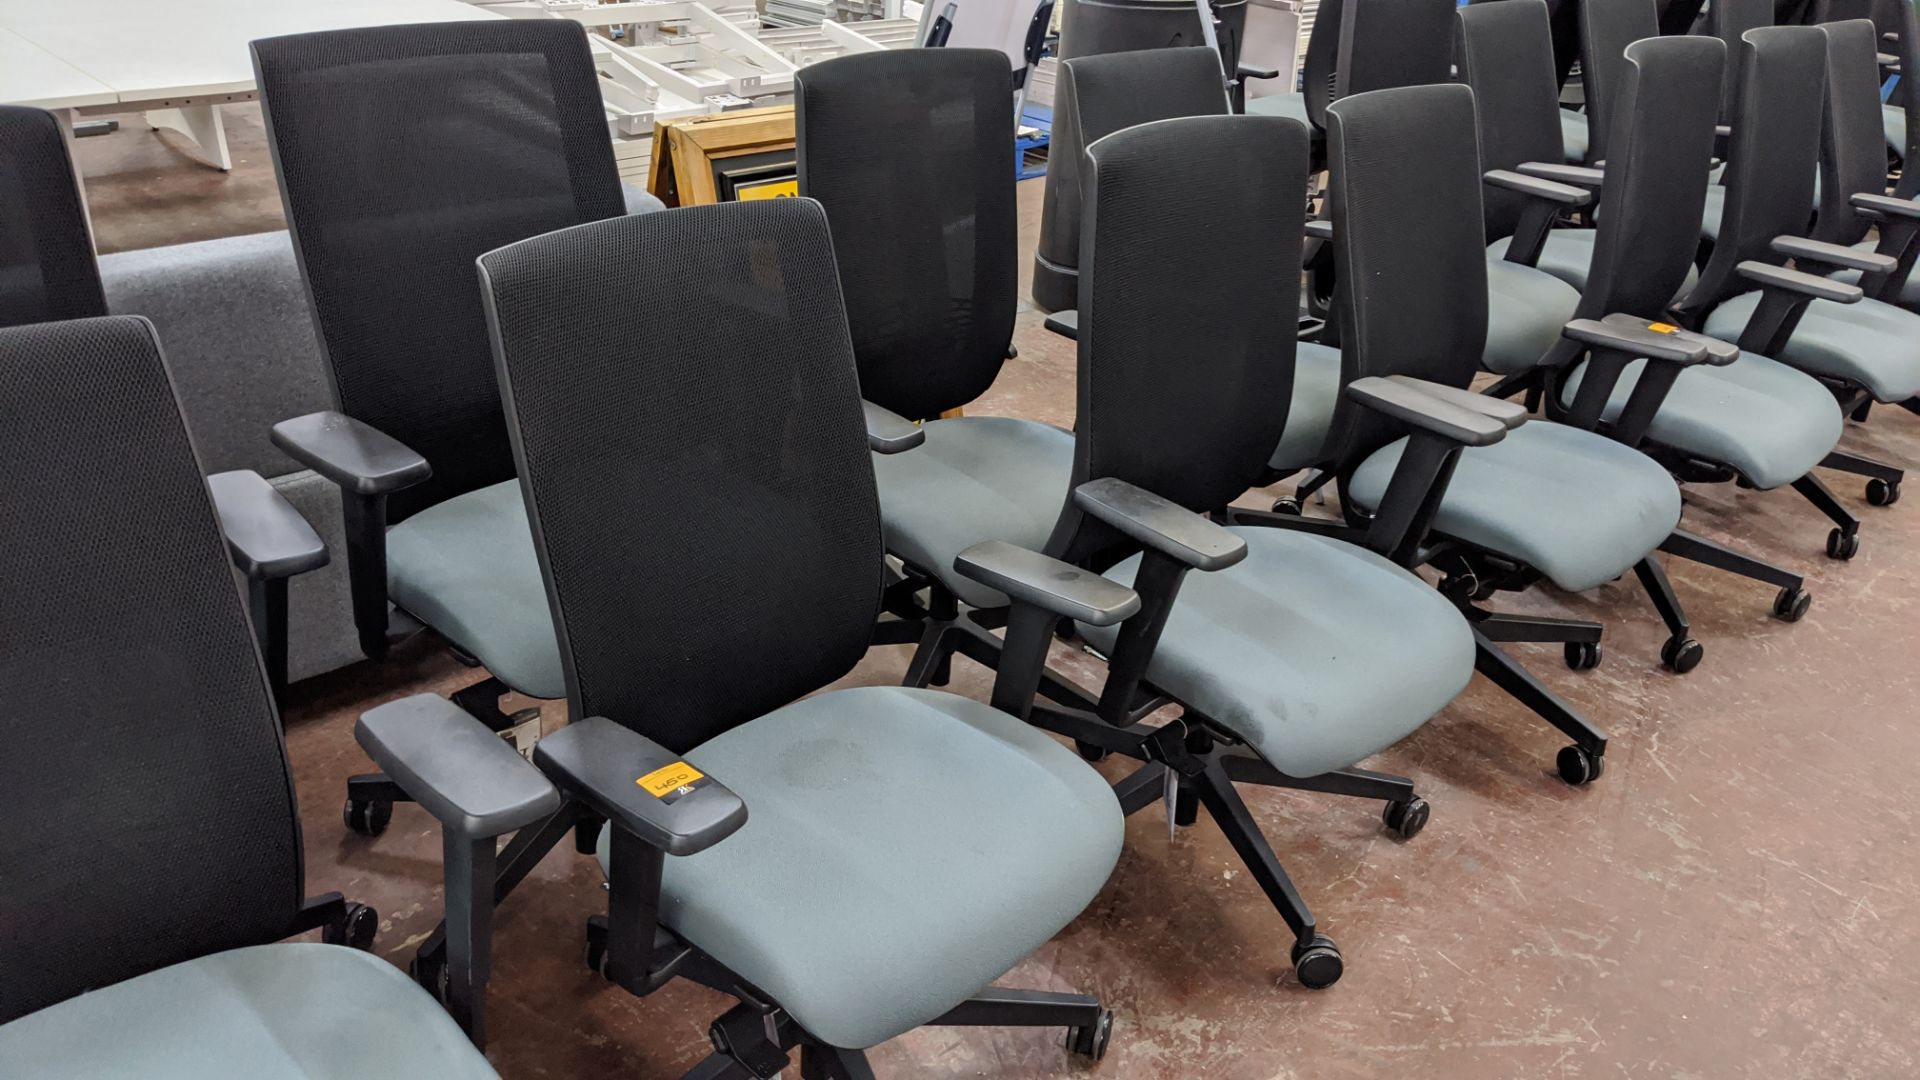 6 off Edge Design modern office chairs with arms, incorporating green/grey fabric seat bases & black